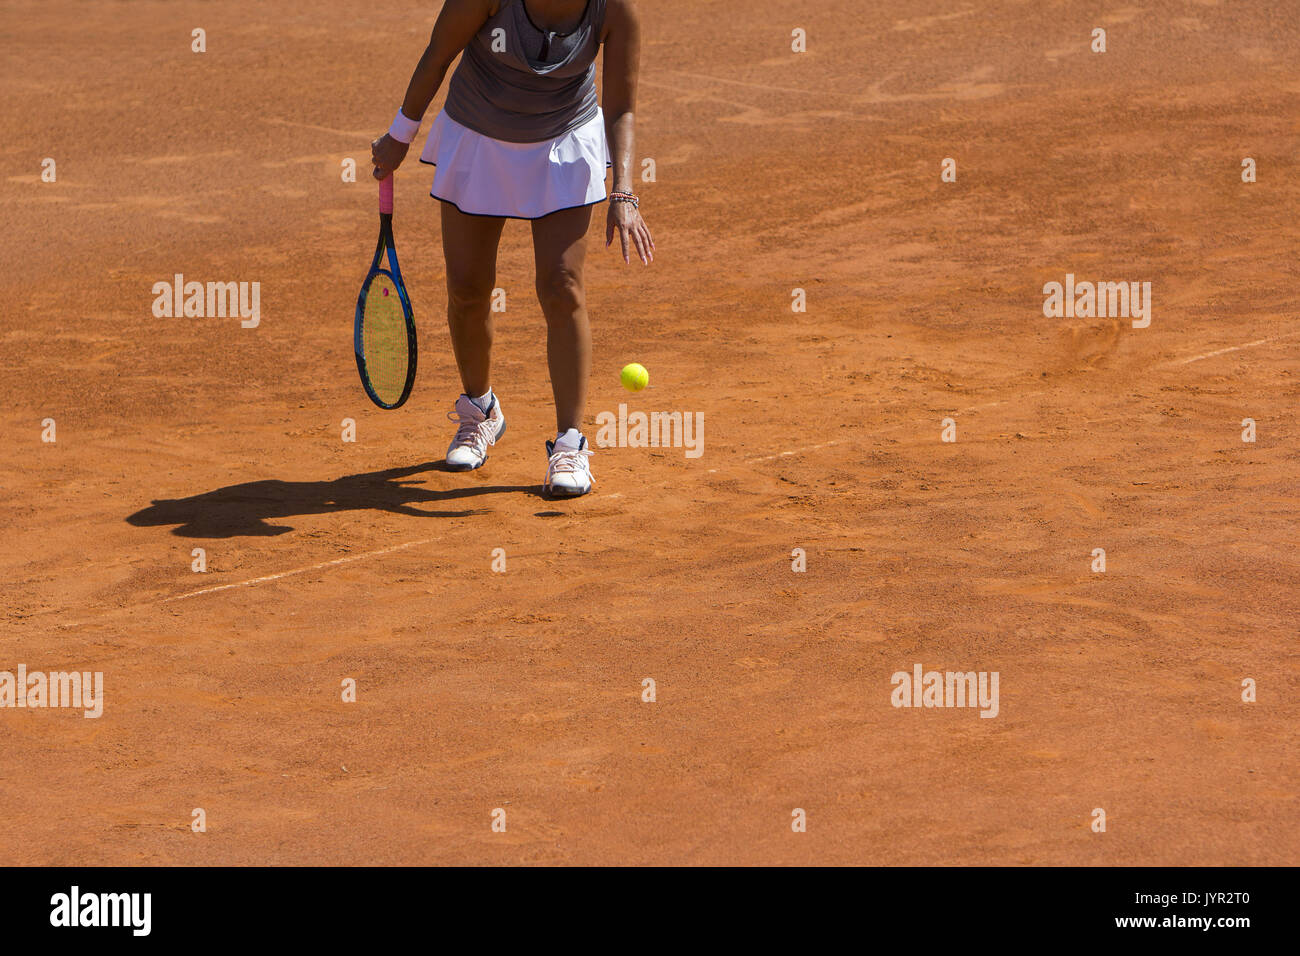 A woman tennis player preparing to serve in tennis cort Stock Photo